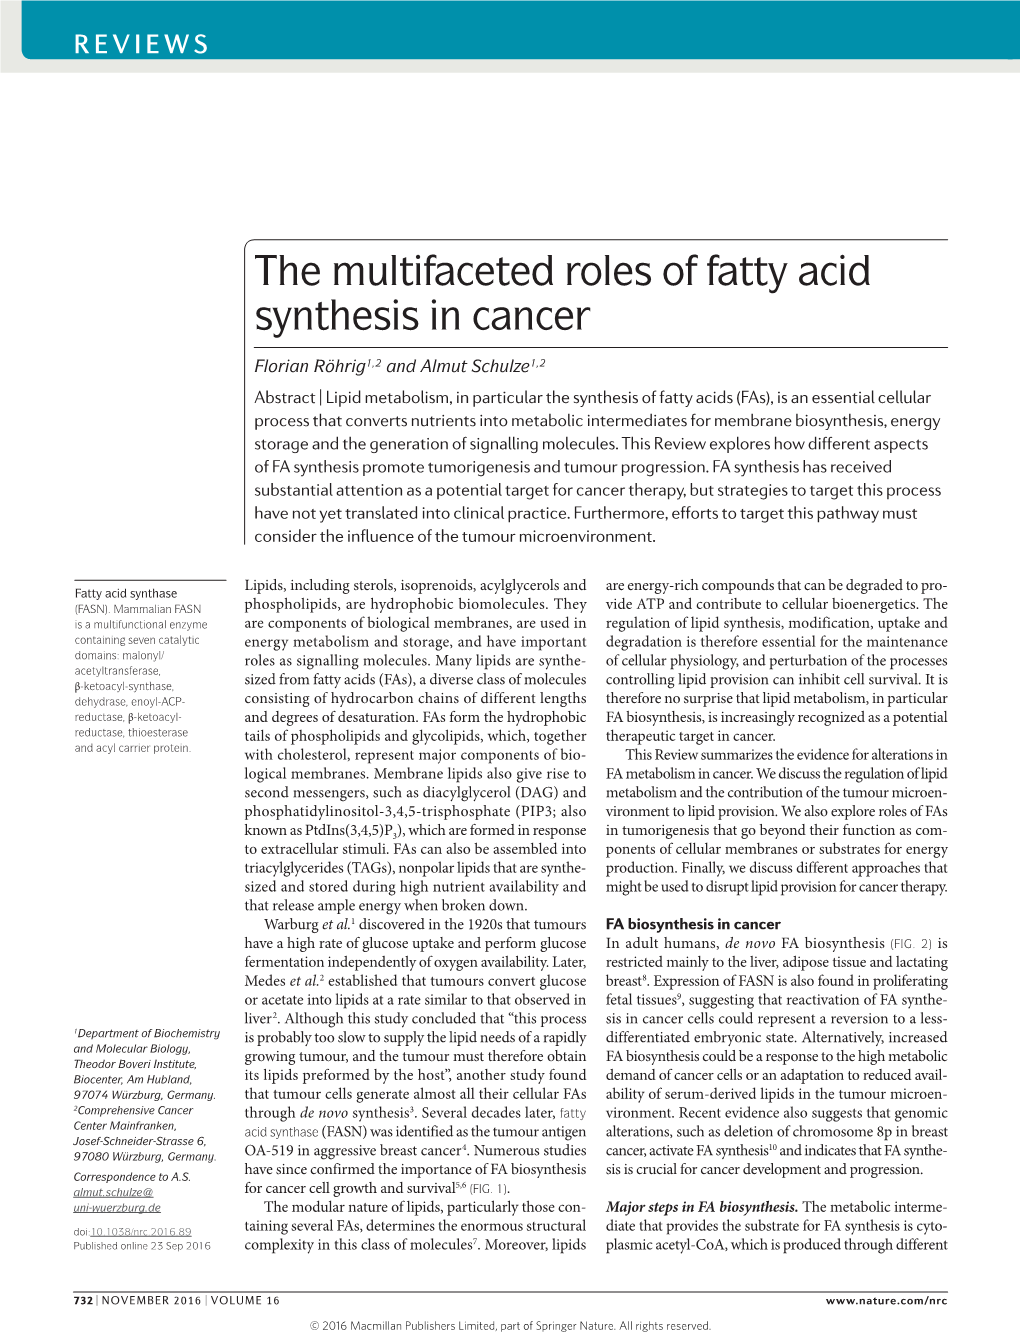 The Multifaceted Roles of Fatty Acid Synthesis in Cancer